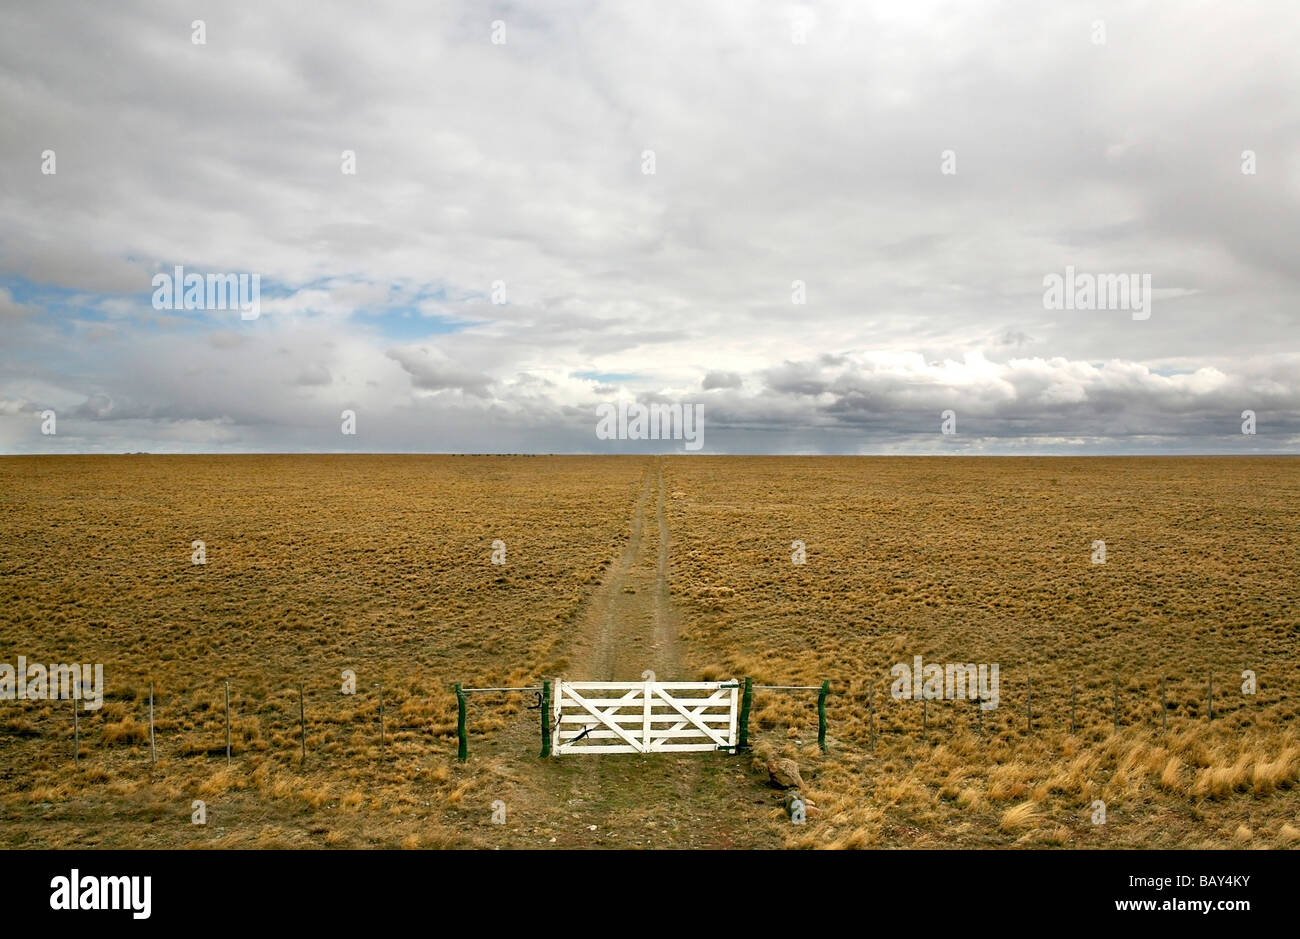 Gate and track near Rio Gallegos, Patagonia, Argentina, South America Stock Photo